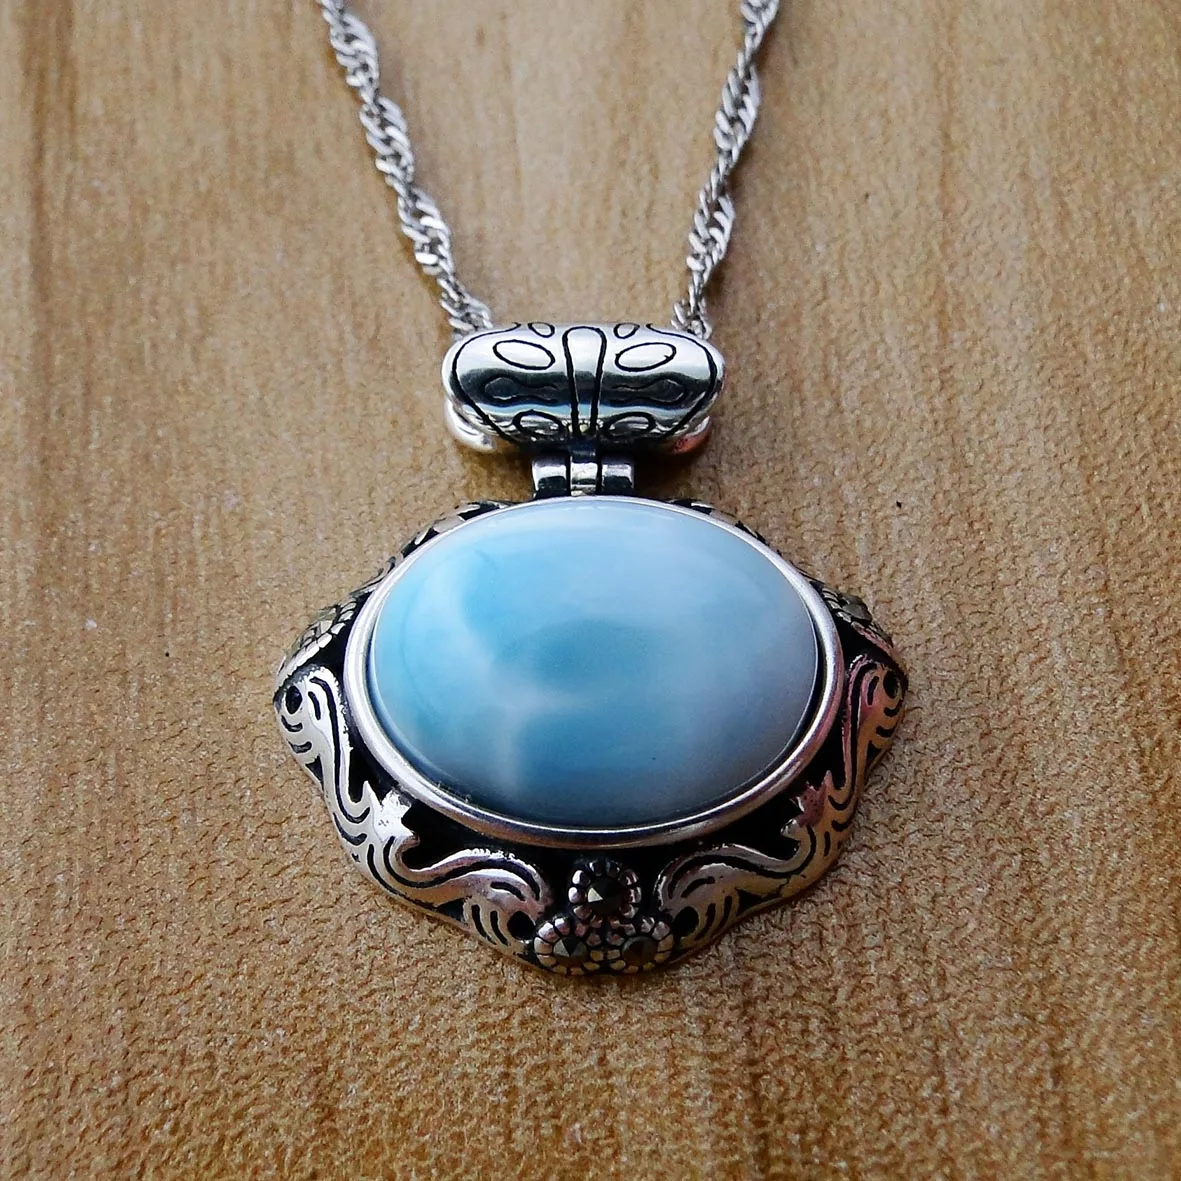 Silver Larimar Jewelry High Quality Oval Cut 12x16mm Natural Larimar Pendant Necklace